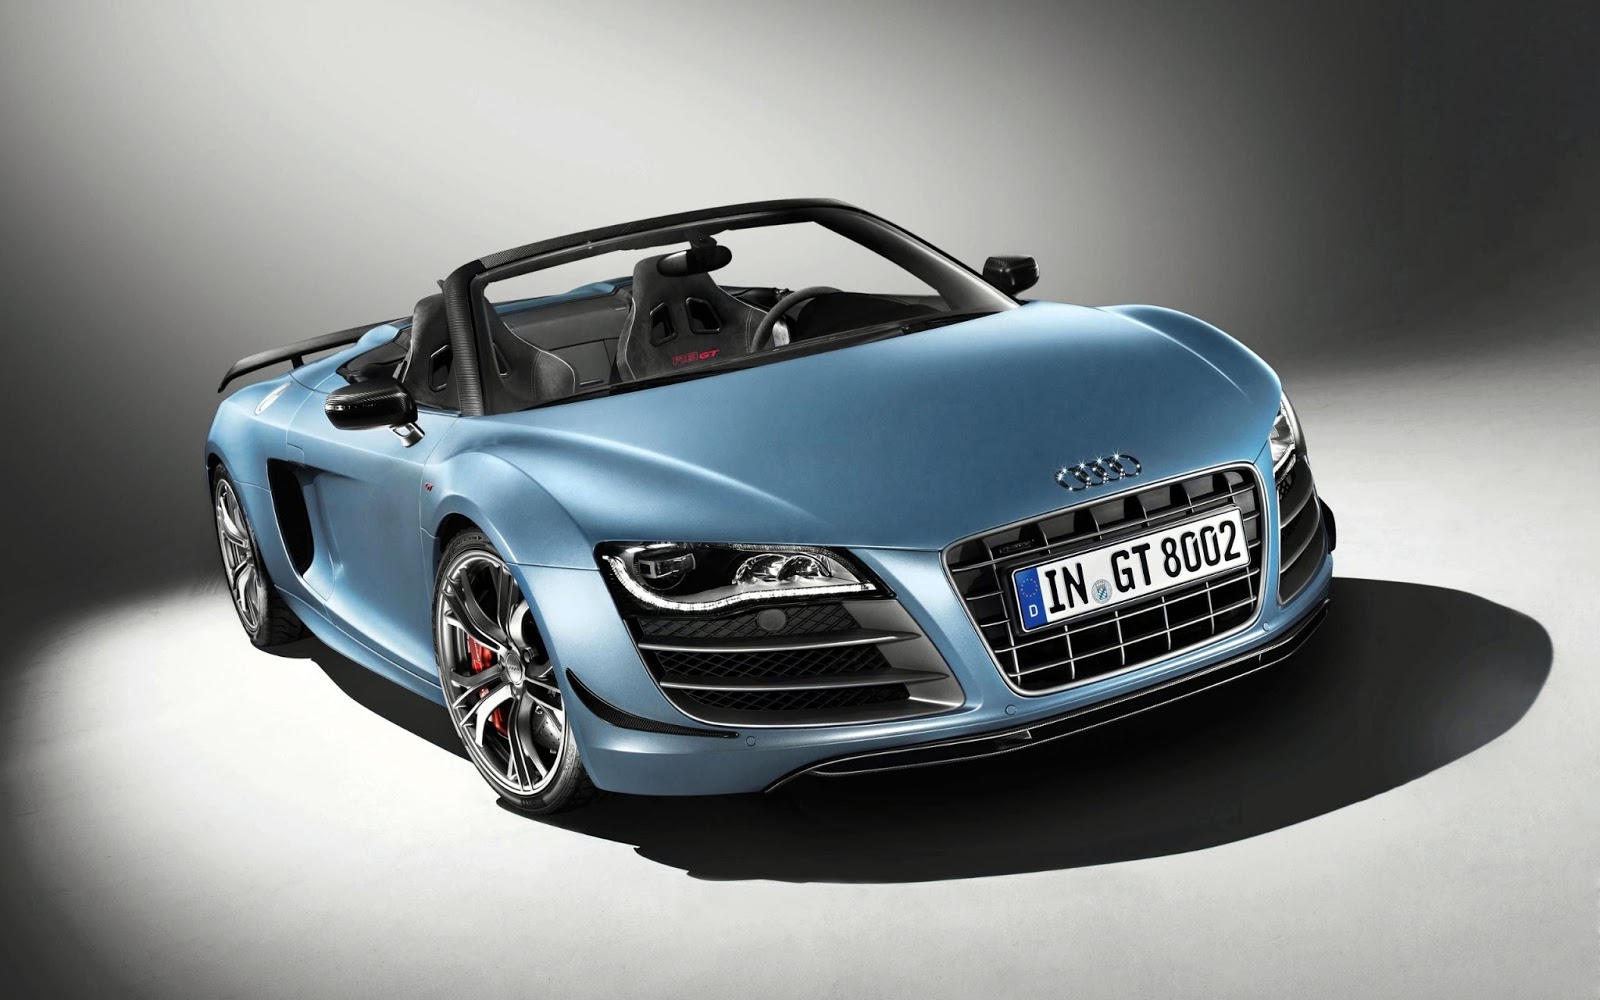 audi r8 hd wallpapers audi r8 hd wallpapers audi r8 hd wallpapers